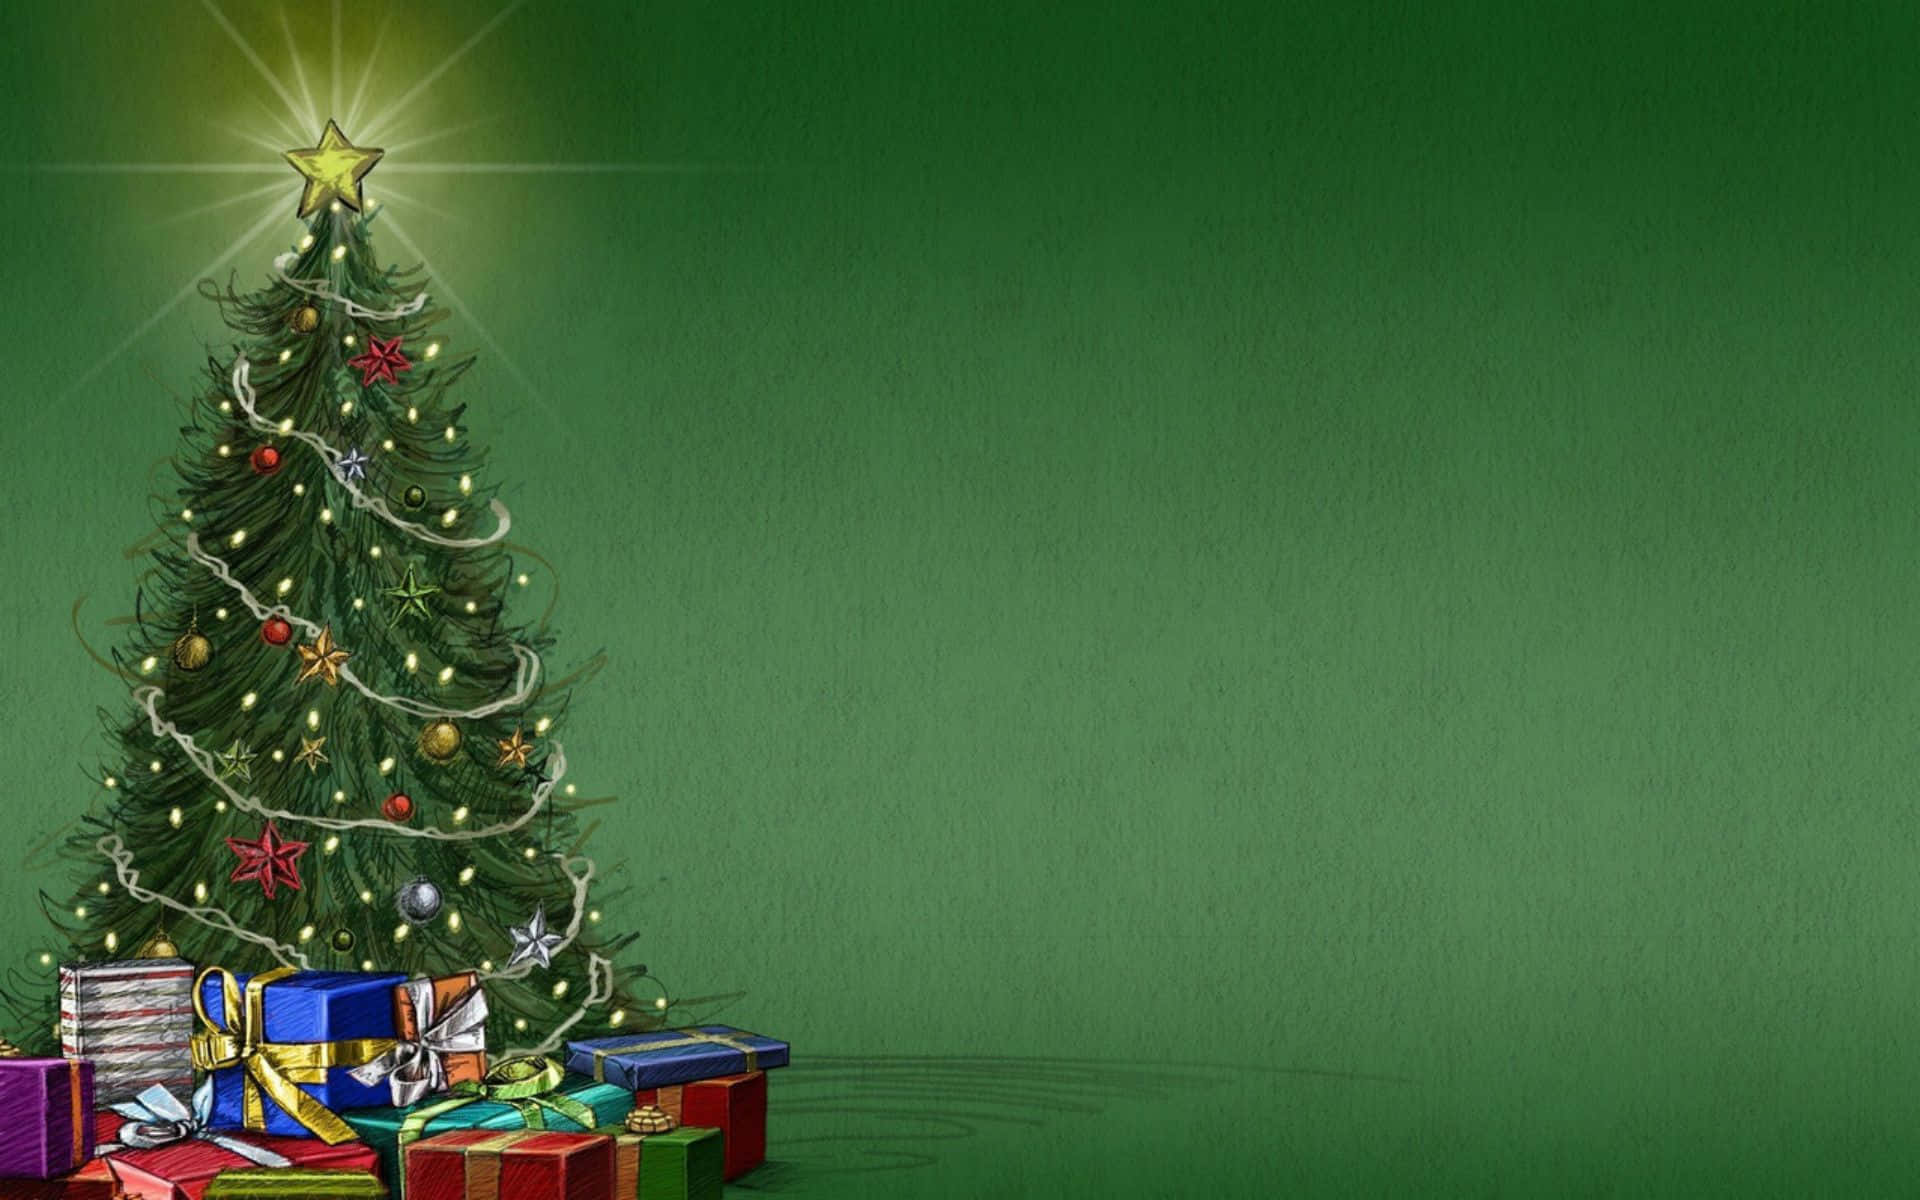 Christmas Tree With Presents On Green Background Wallpaper